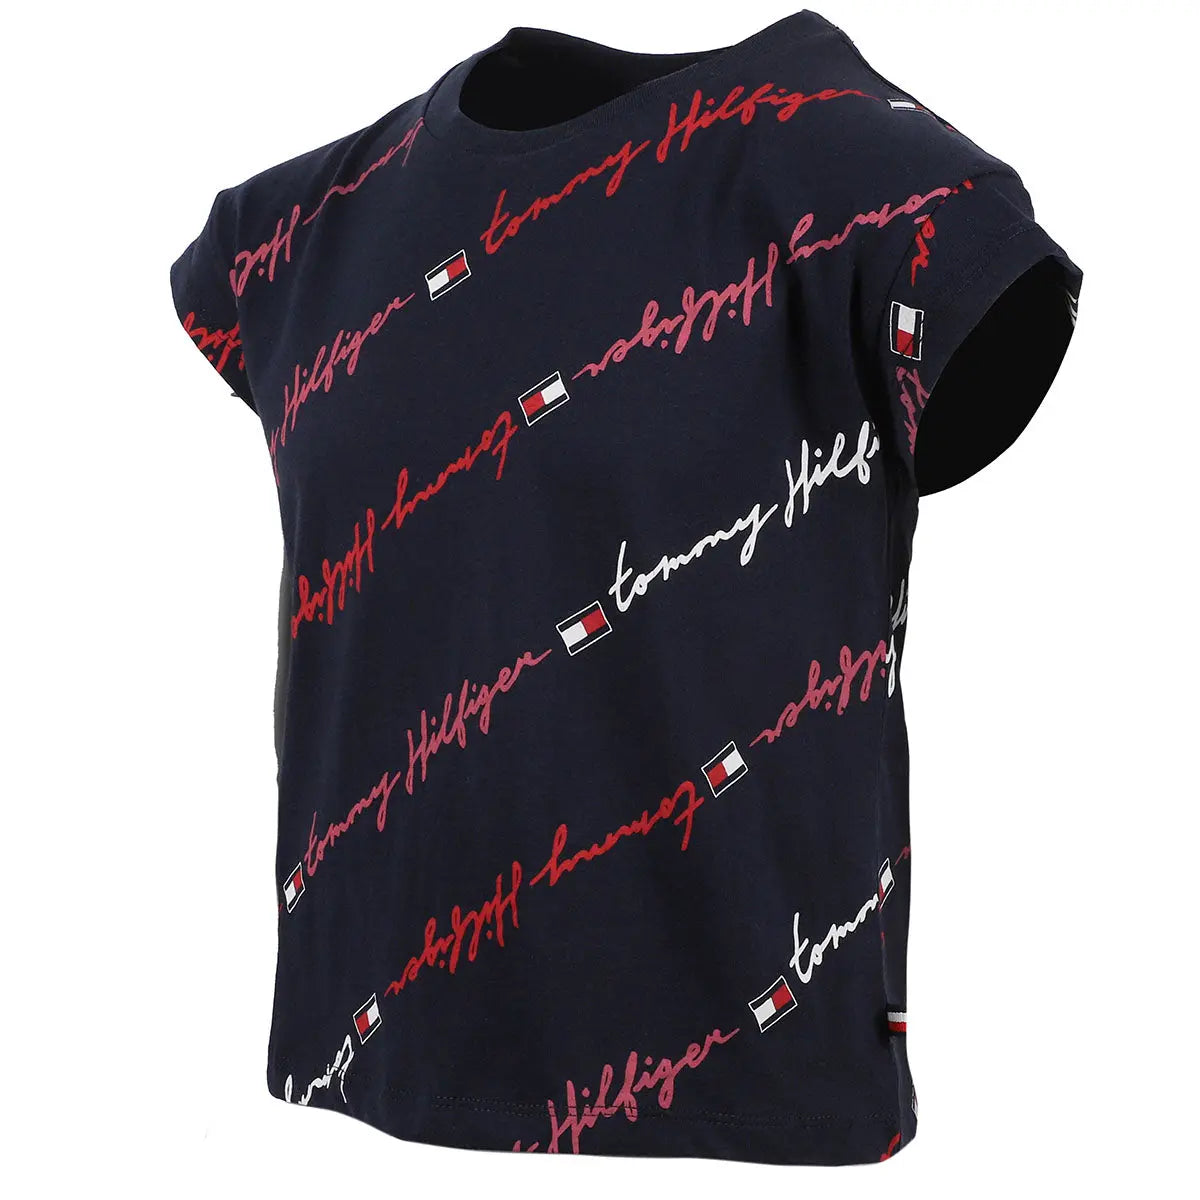 Tommy Hilfiger Girl's Allover Script Print Tee